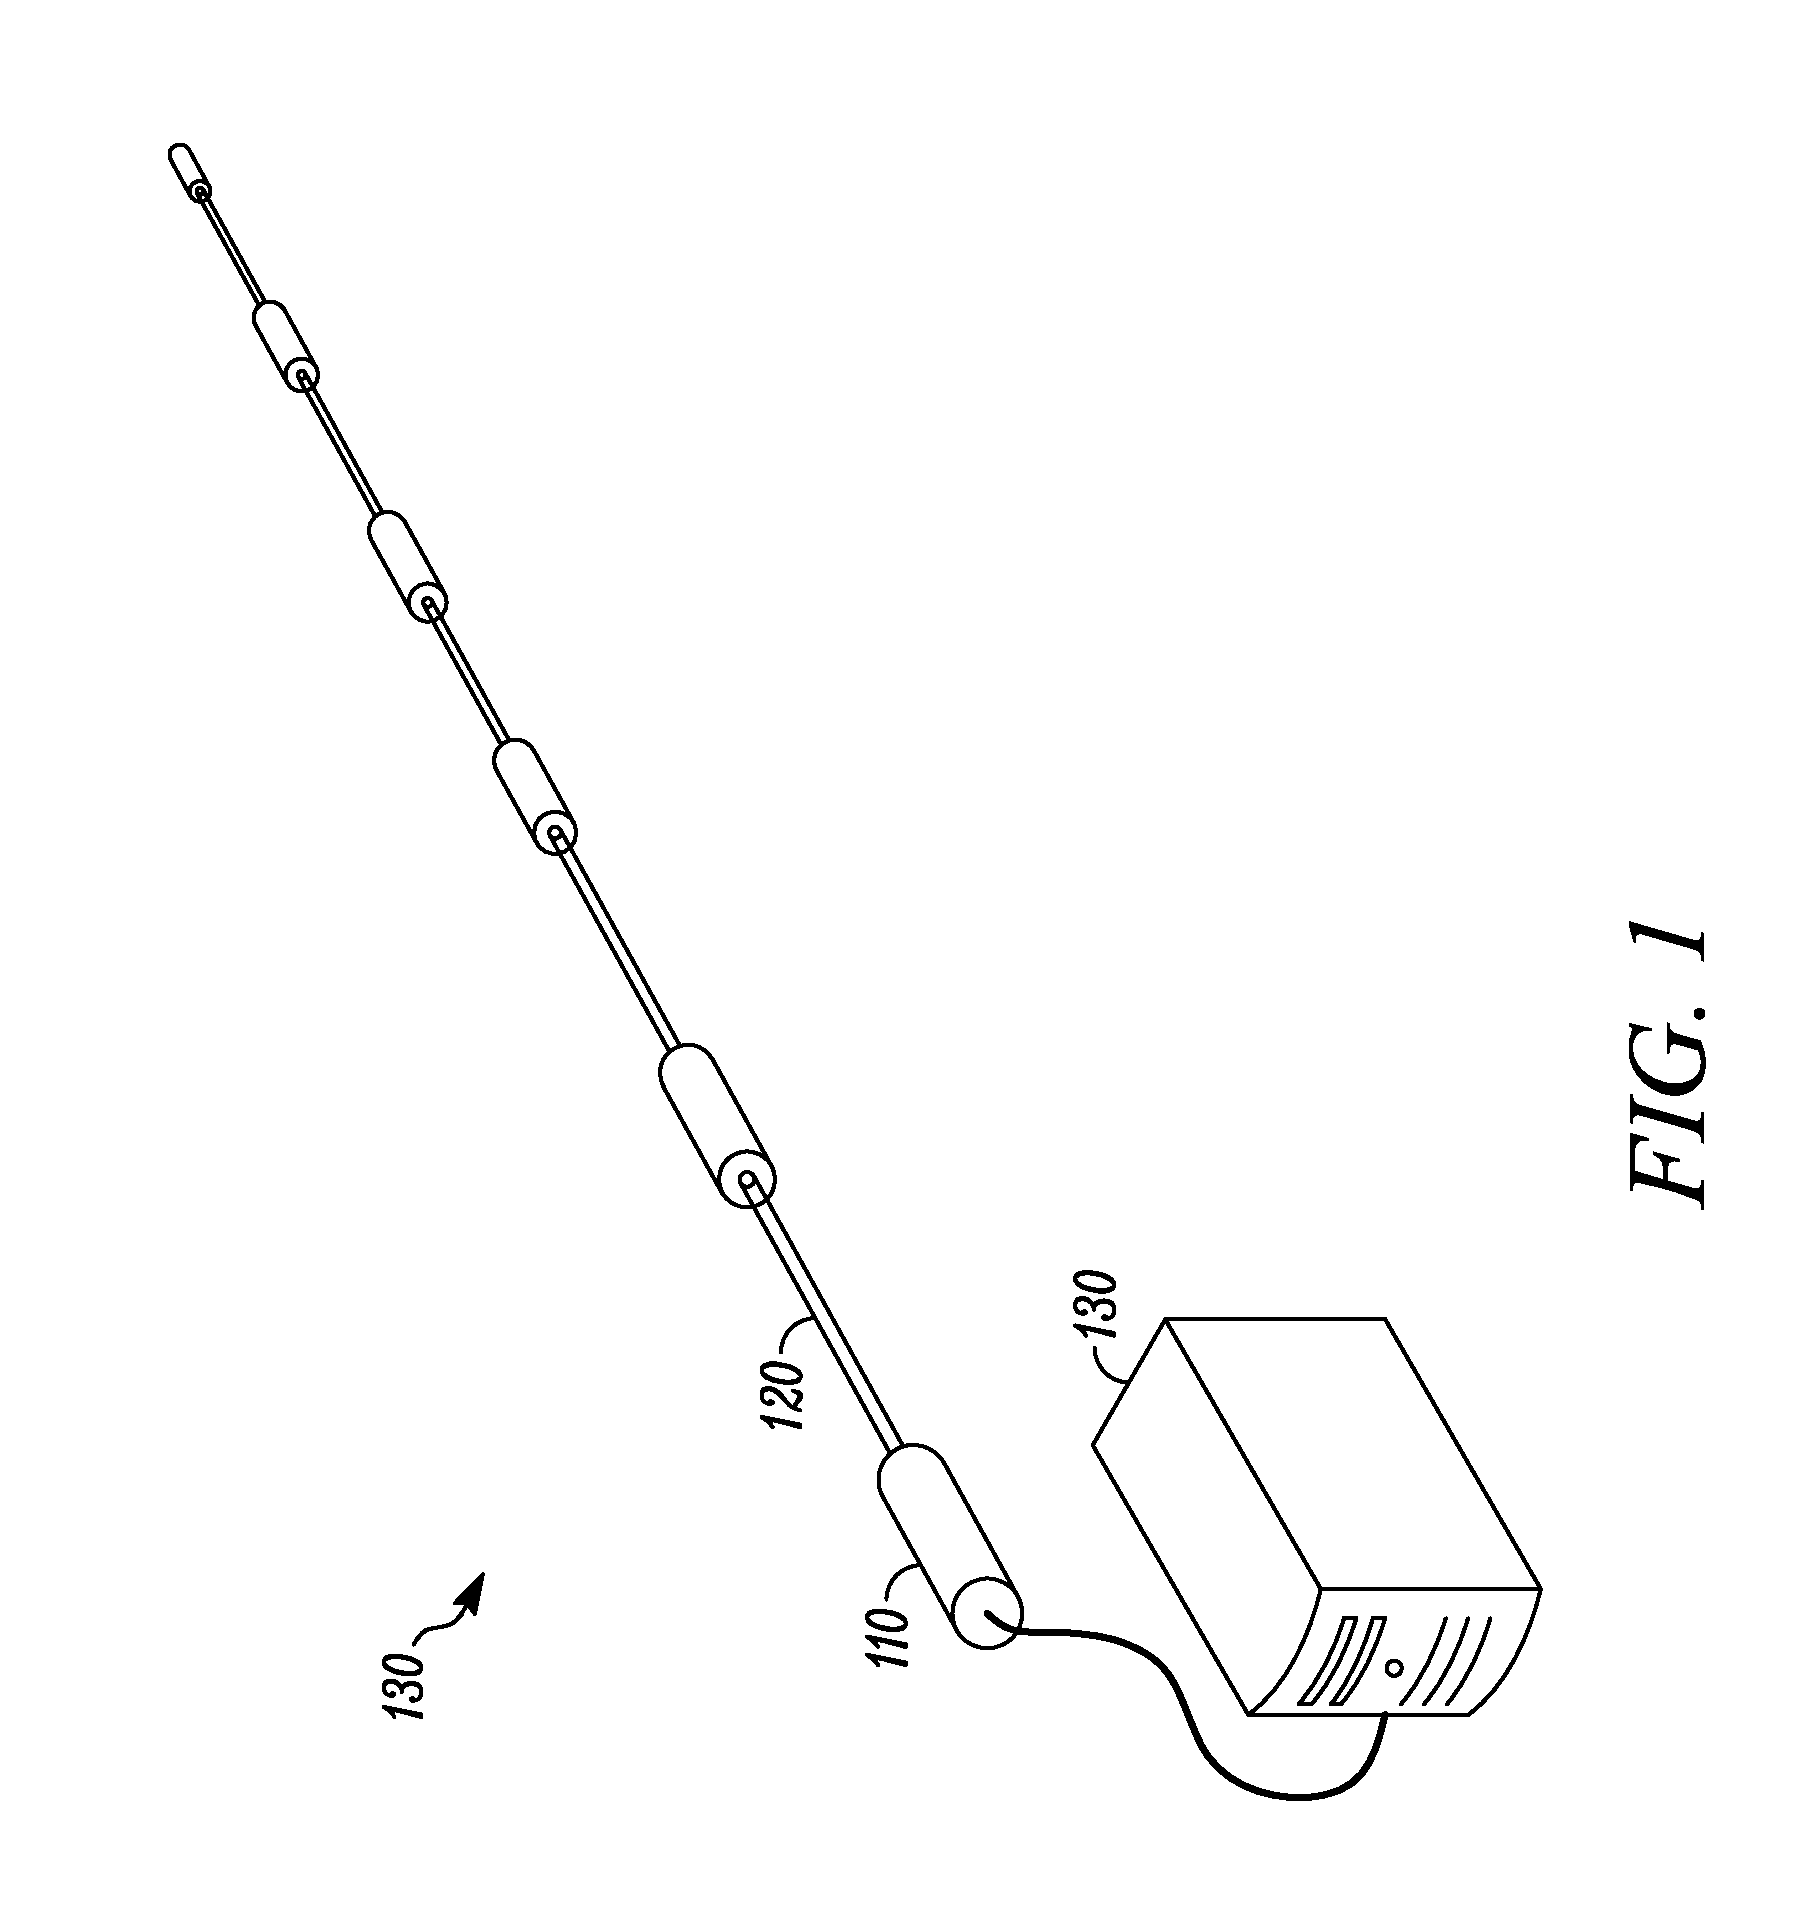 Context aware multiple-input and multiple-output antenna systems and methods